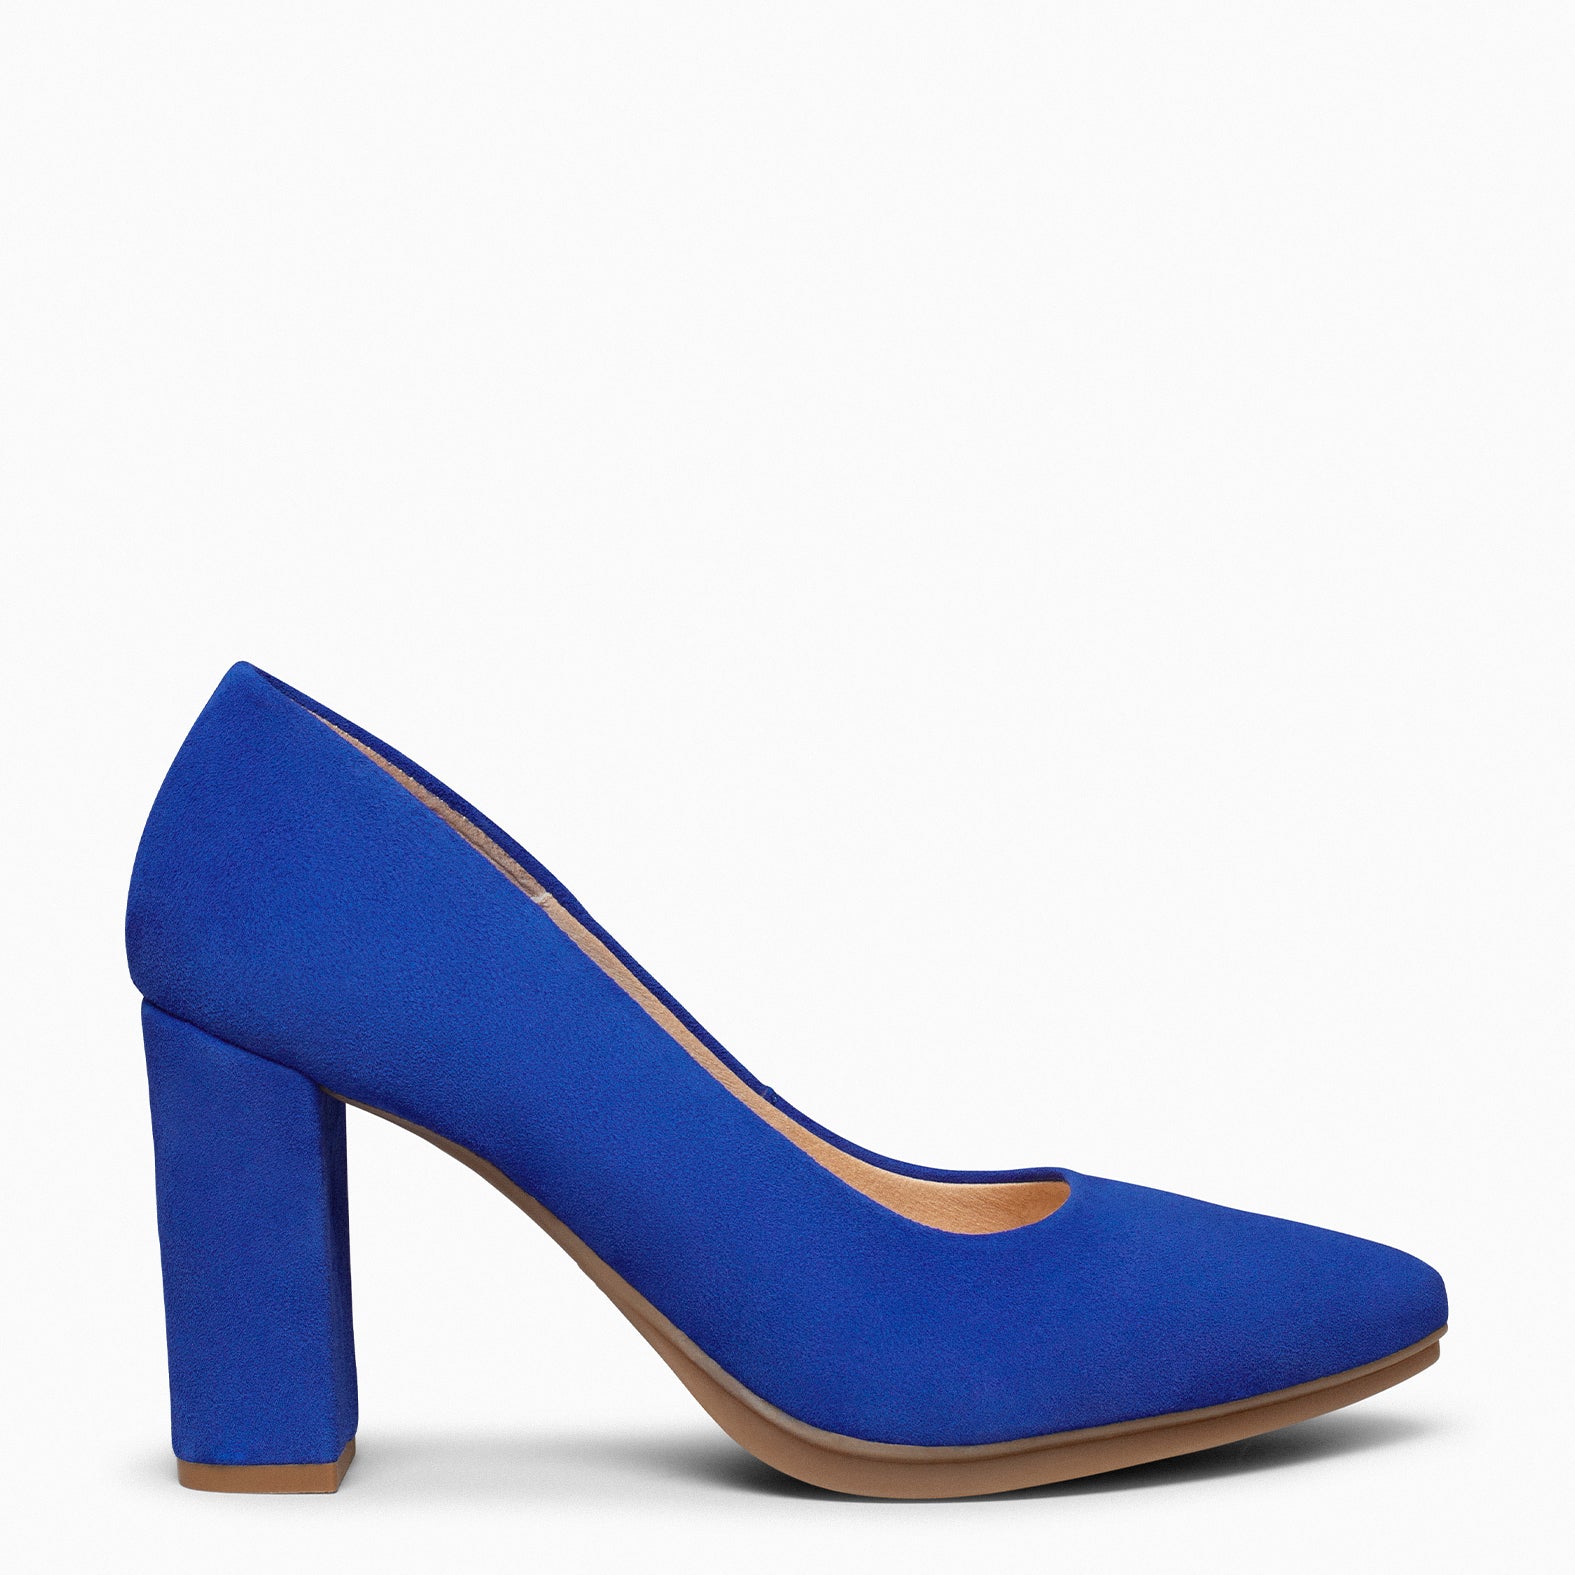 URBAN – ELECTRIC BLUE Suede high-heeled shoes 